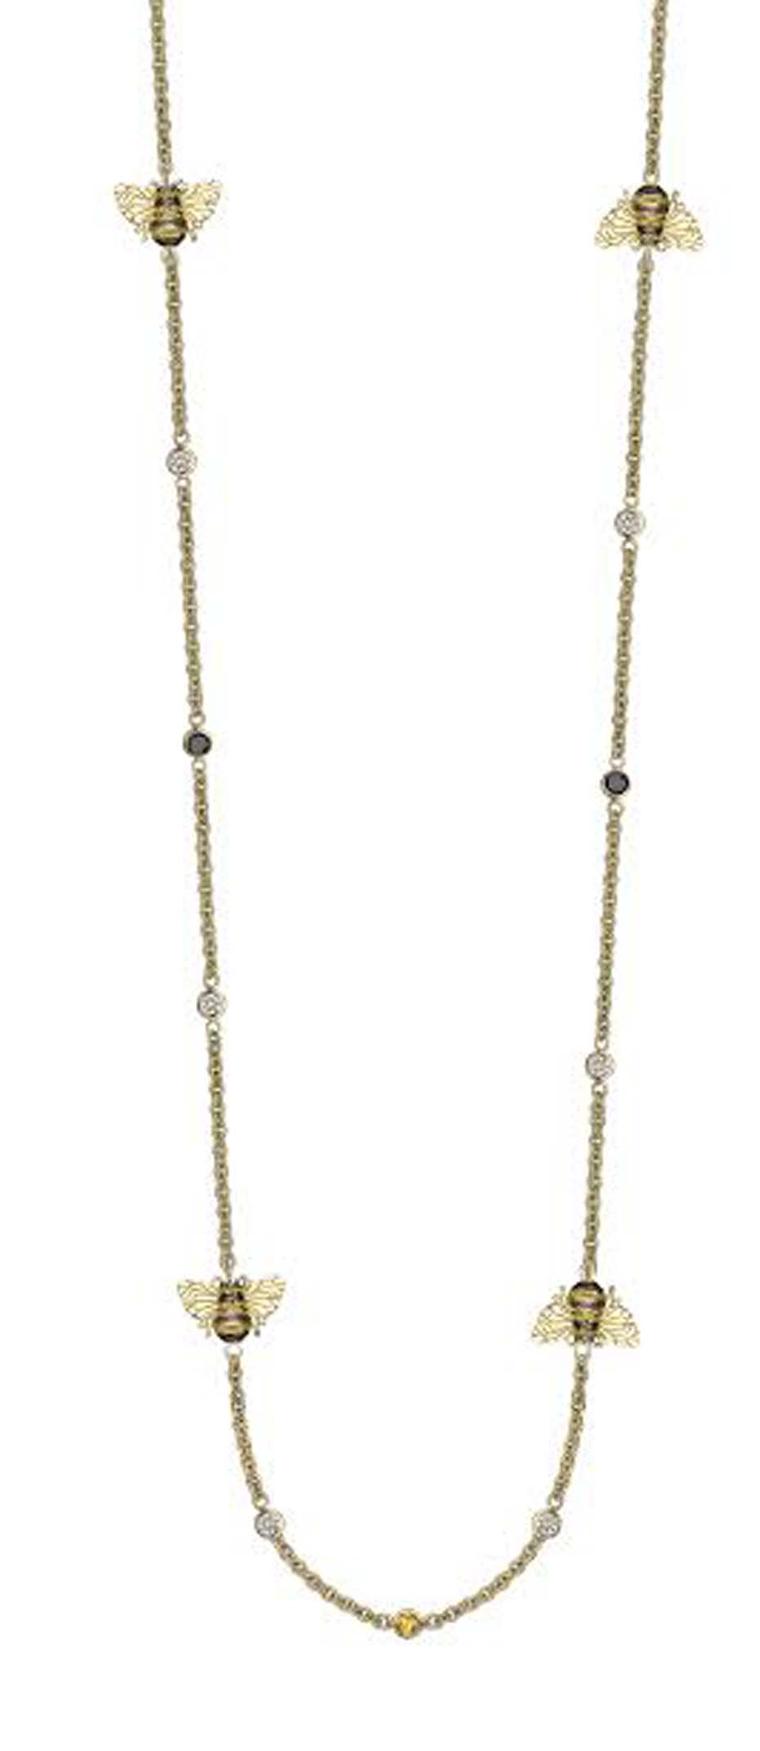 Theo Fennell bee necklace in yellow gold, with black and white diamonds and yellow sapphires.